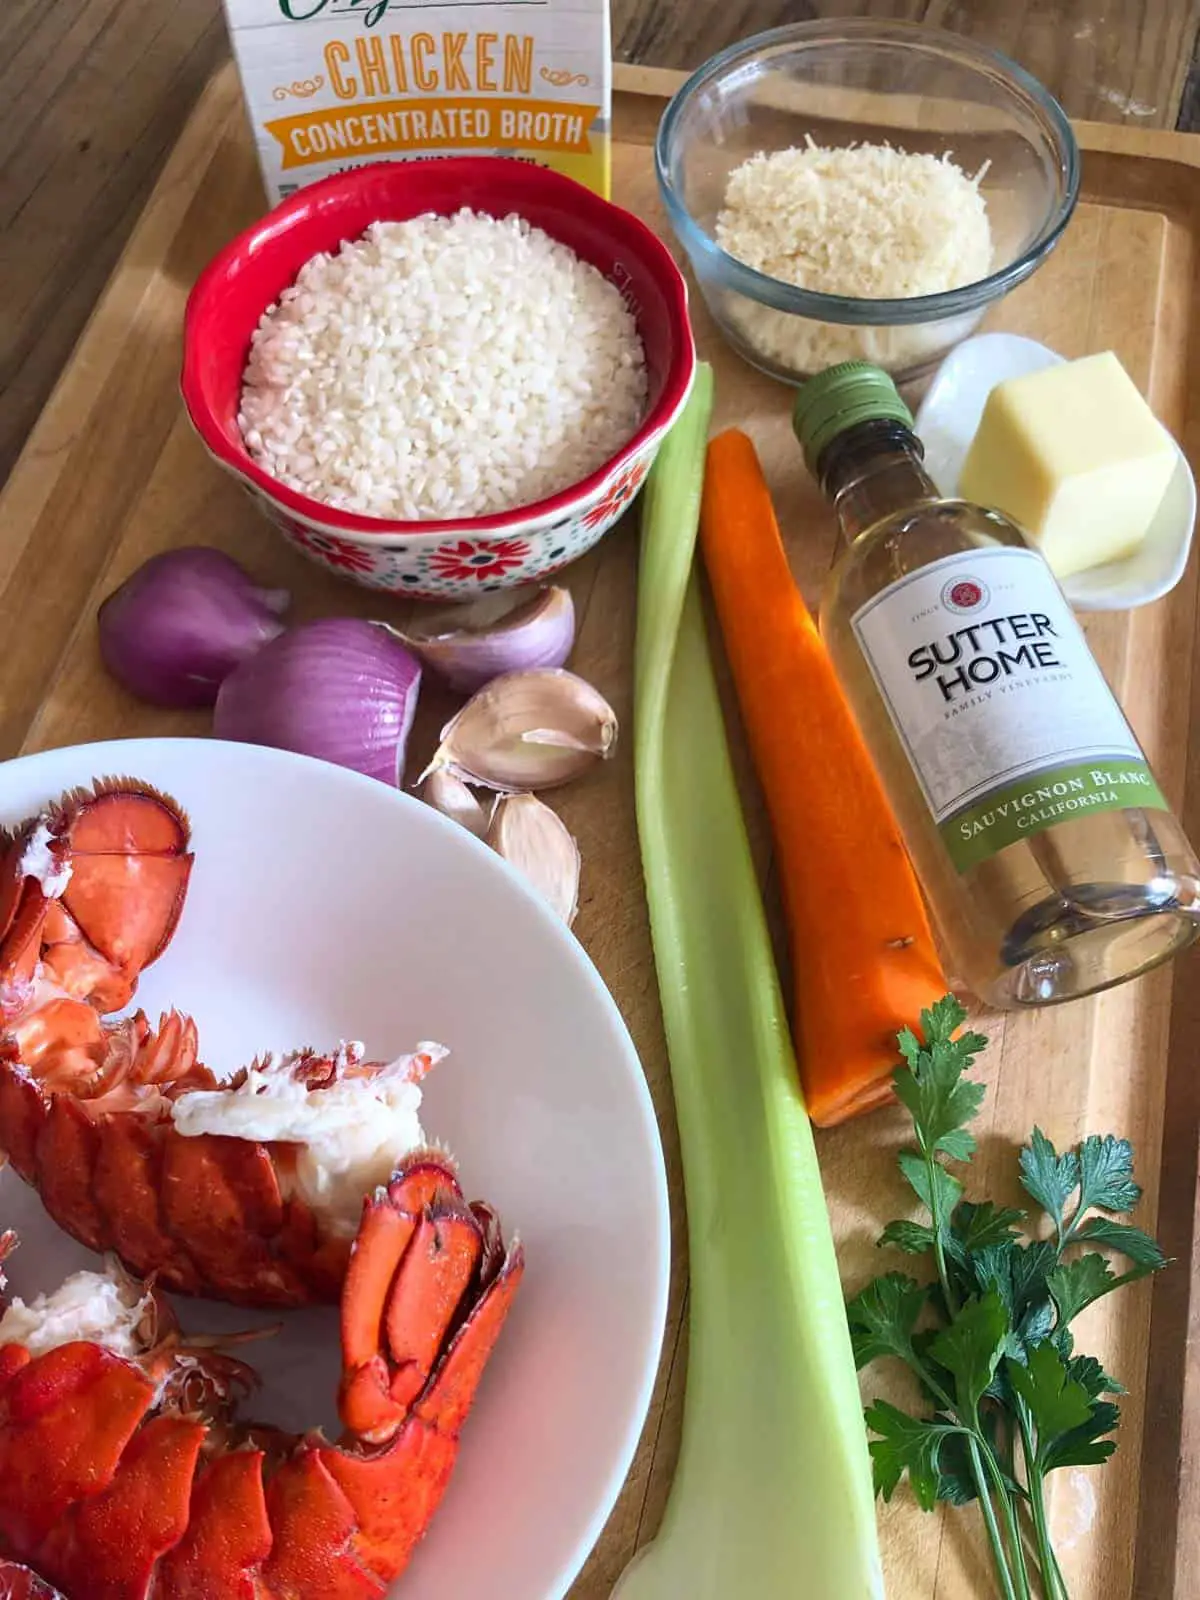 Cooked lobster tails on a white bowl, shallots, garlic, risotto rice in a red bowl, carton of chicken broth, grated Parmesan cheese in a glass bowl, celery stalk, carrot, bottle of Sutter home Sauvignon Blanc, butter in a white dish, and Italian parsley on a wooden cutting board.